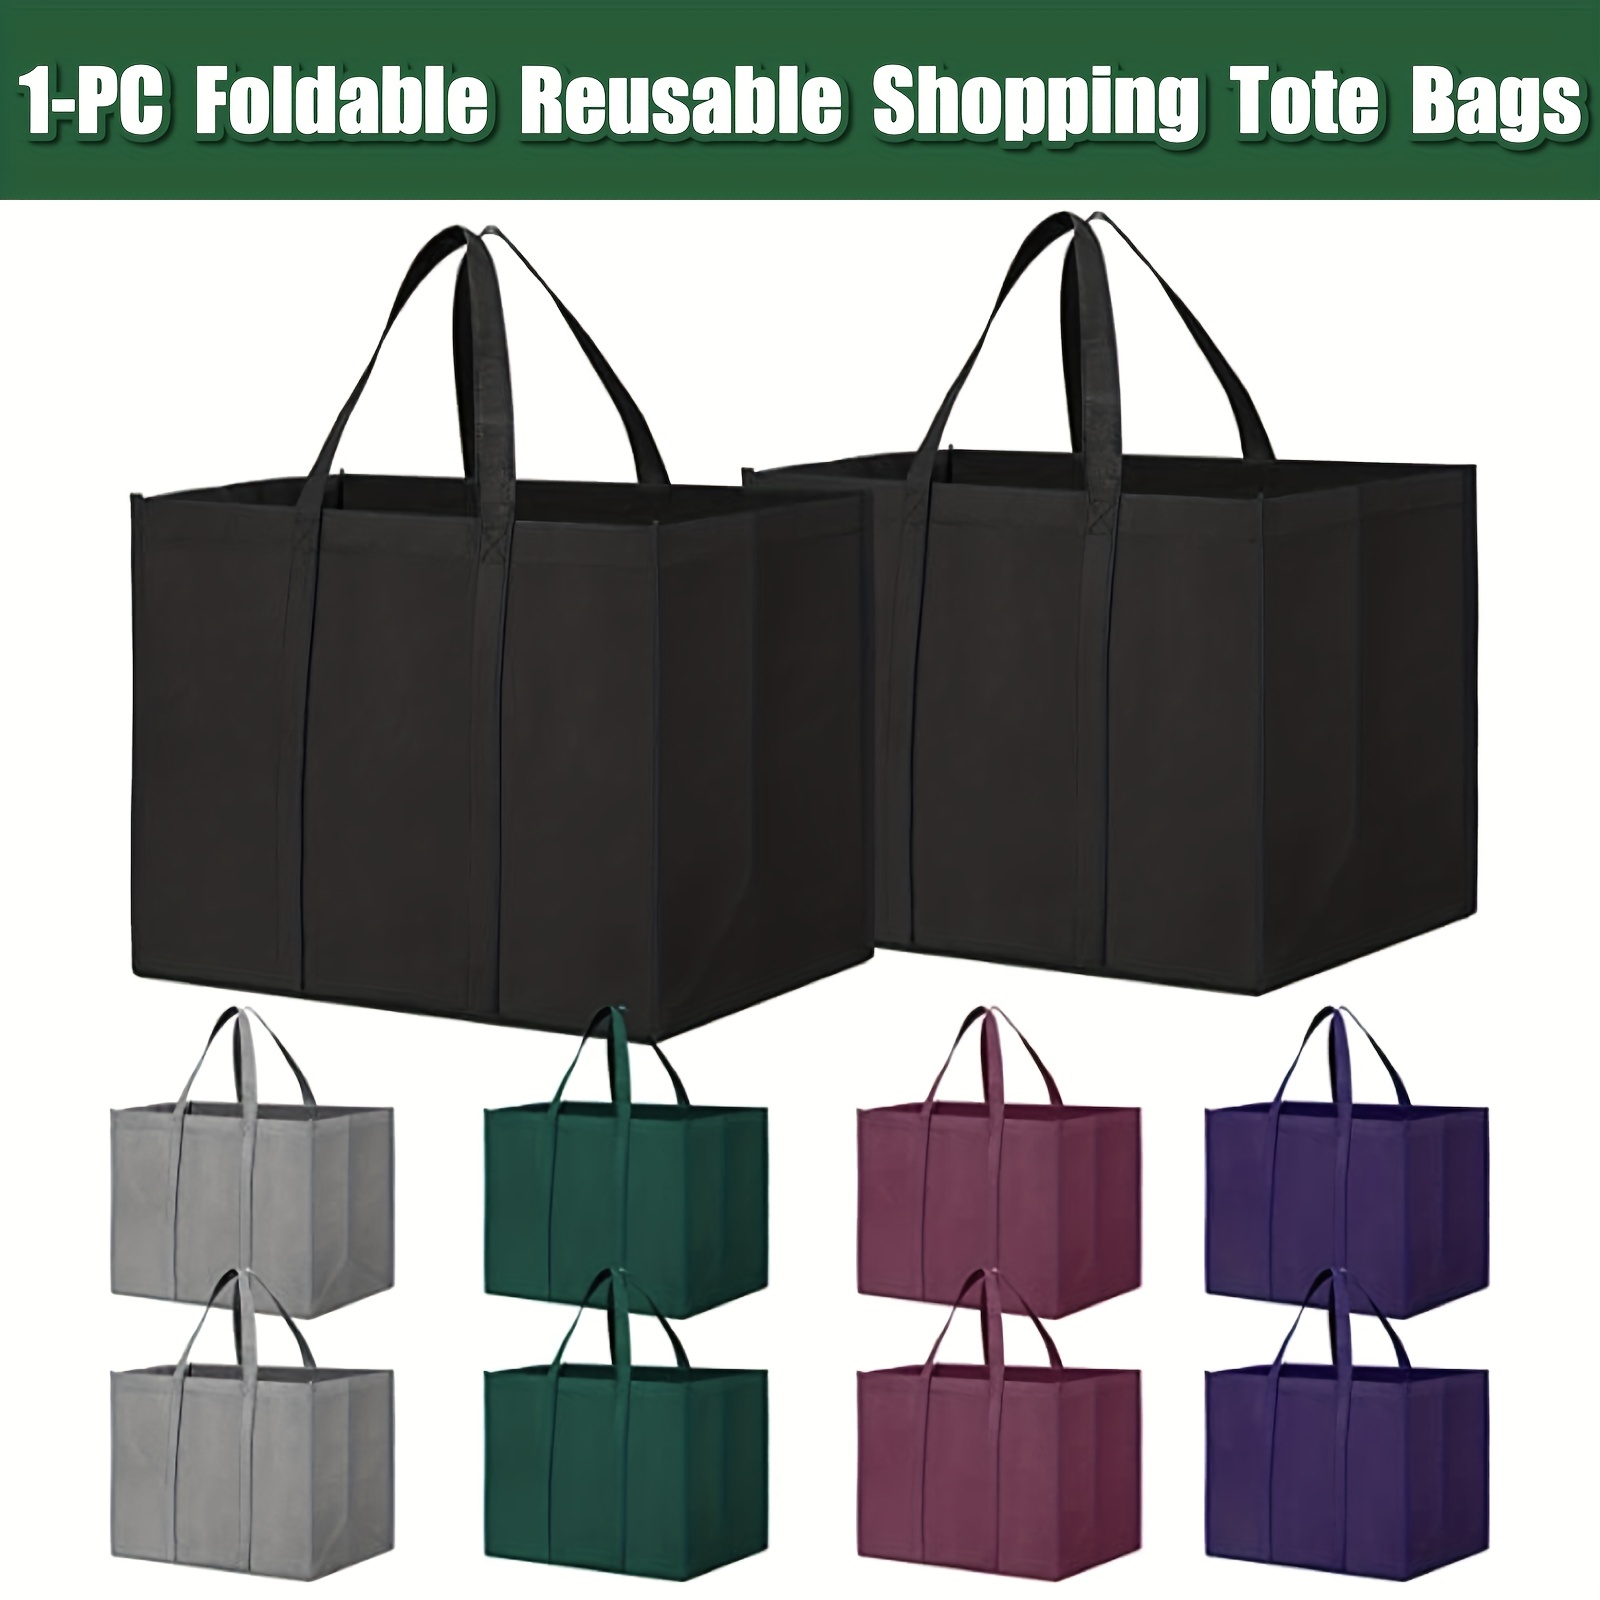 Reusable-Grocery-Bags-Foldable-Machine-Washable-Reusable-Shopping-Bags-Bulk  Colorful 10 Pack 50LBS Extra Large Folding Reusable Bags Totes w Zipper  Storage Bag Sturdy Lightweight Polyester Fabric : : Home